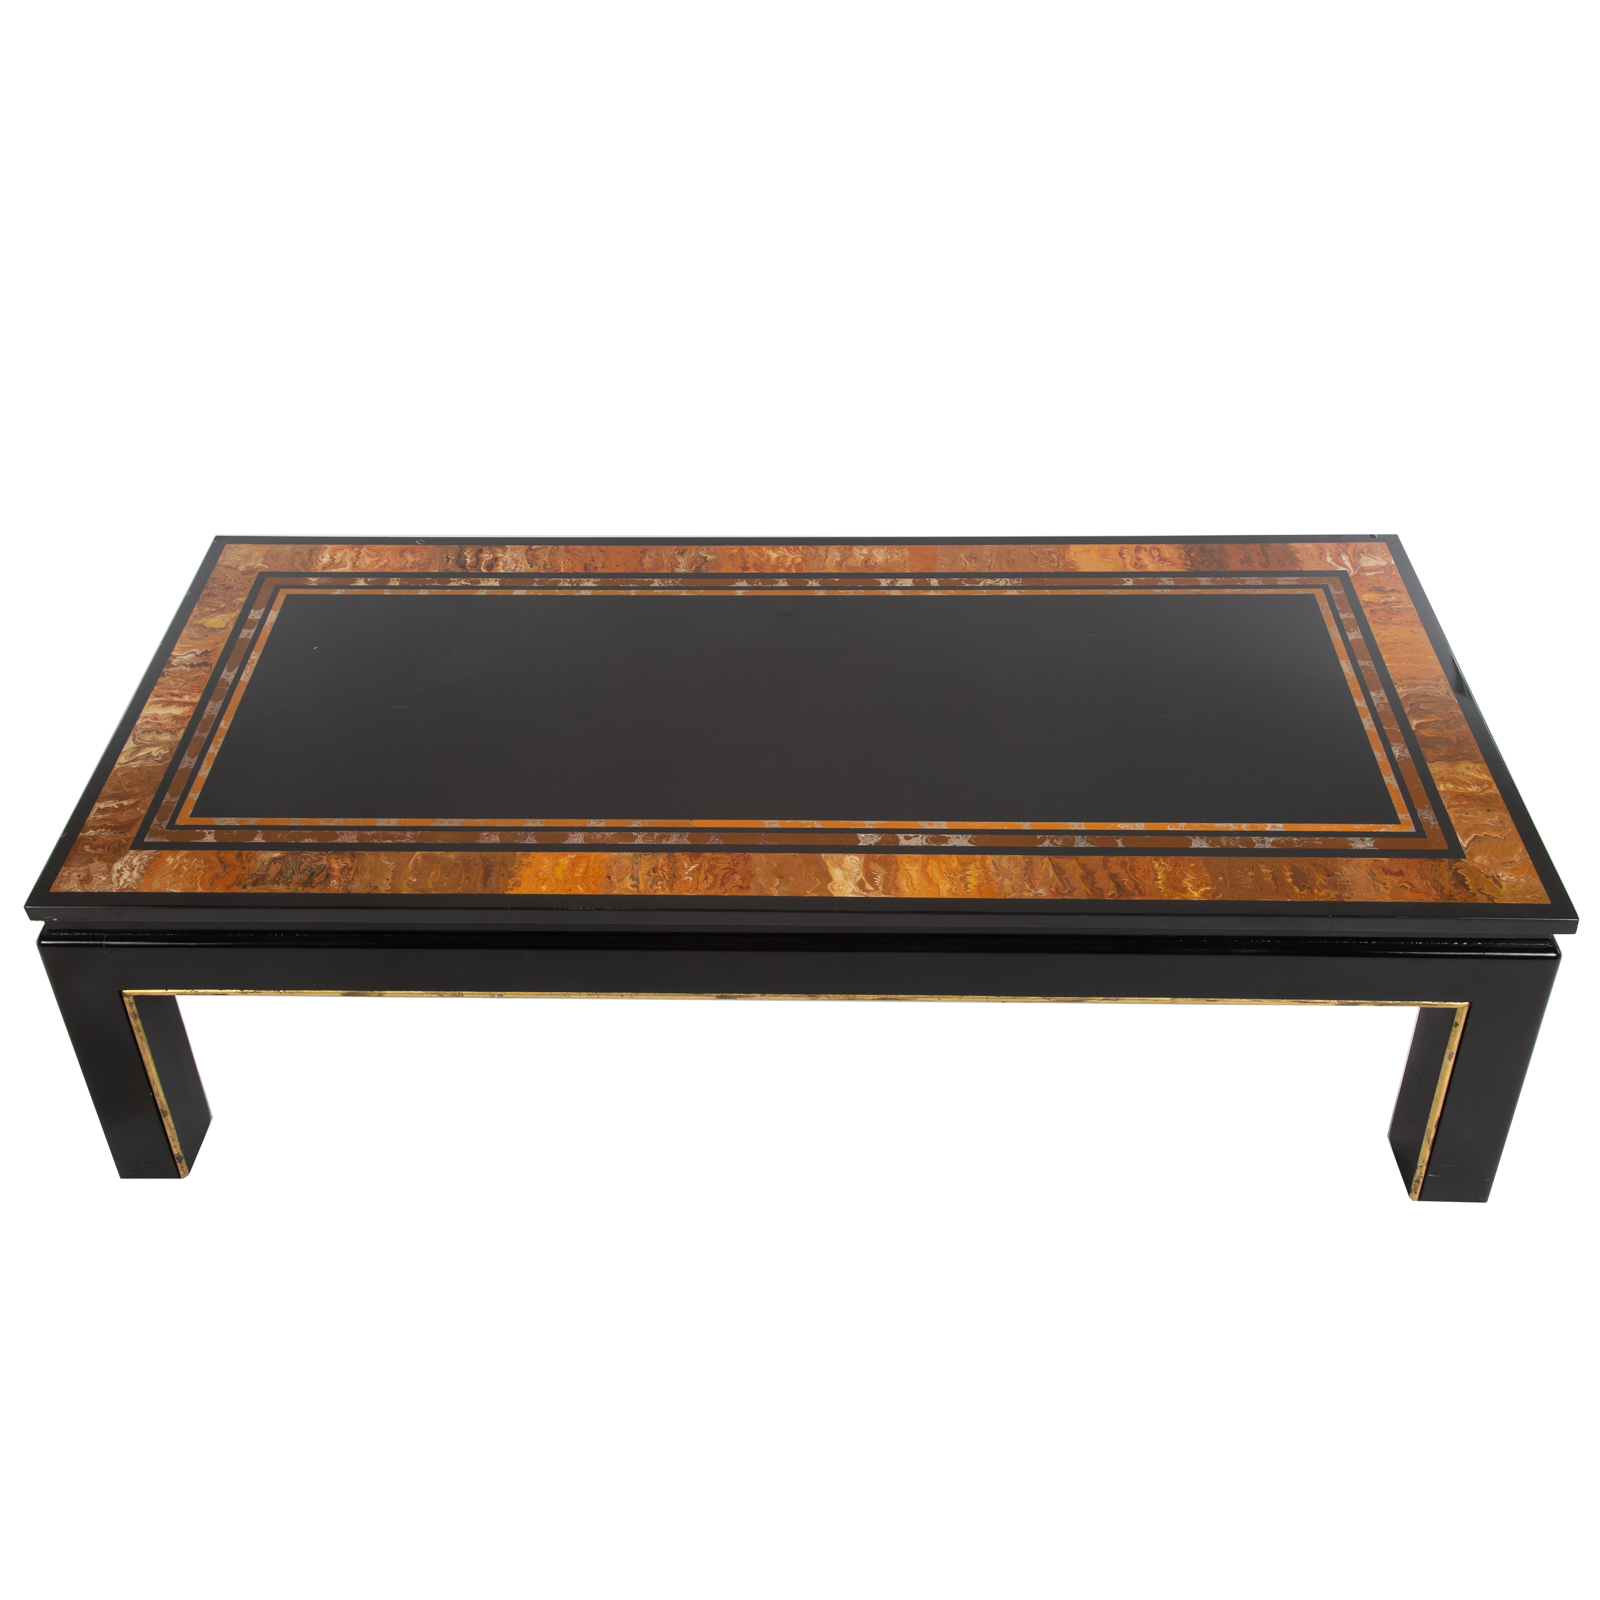 CHINOISERIE LACQUERED COFFEE TABLE